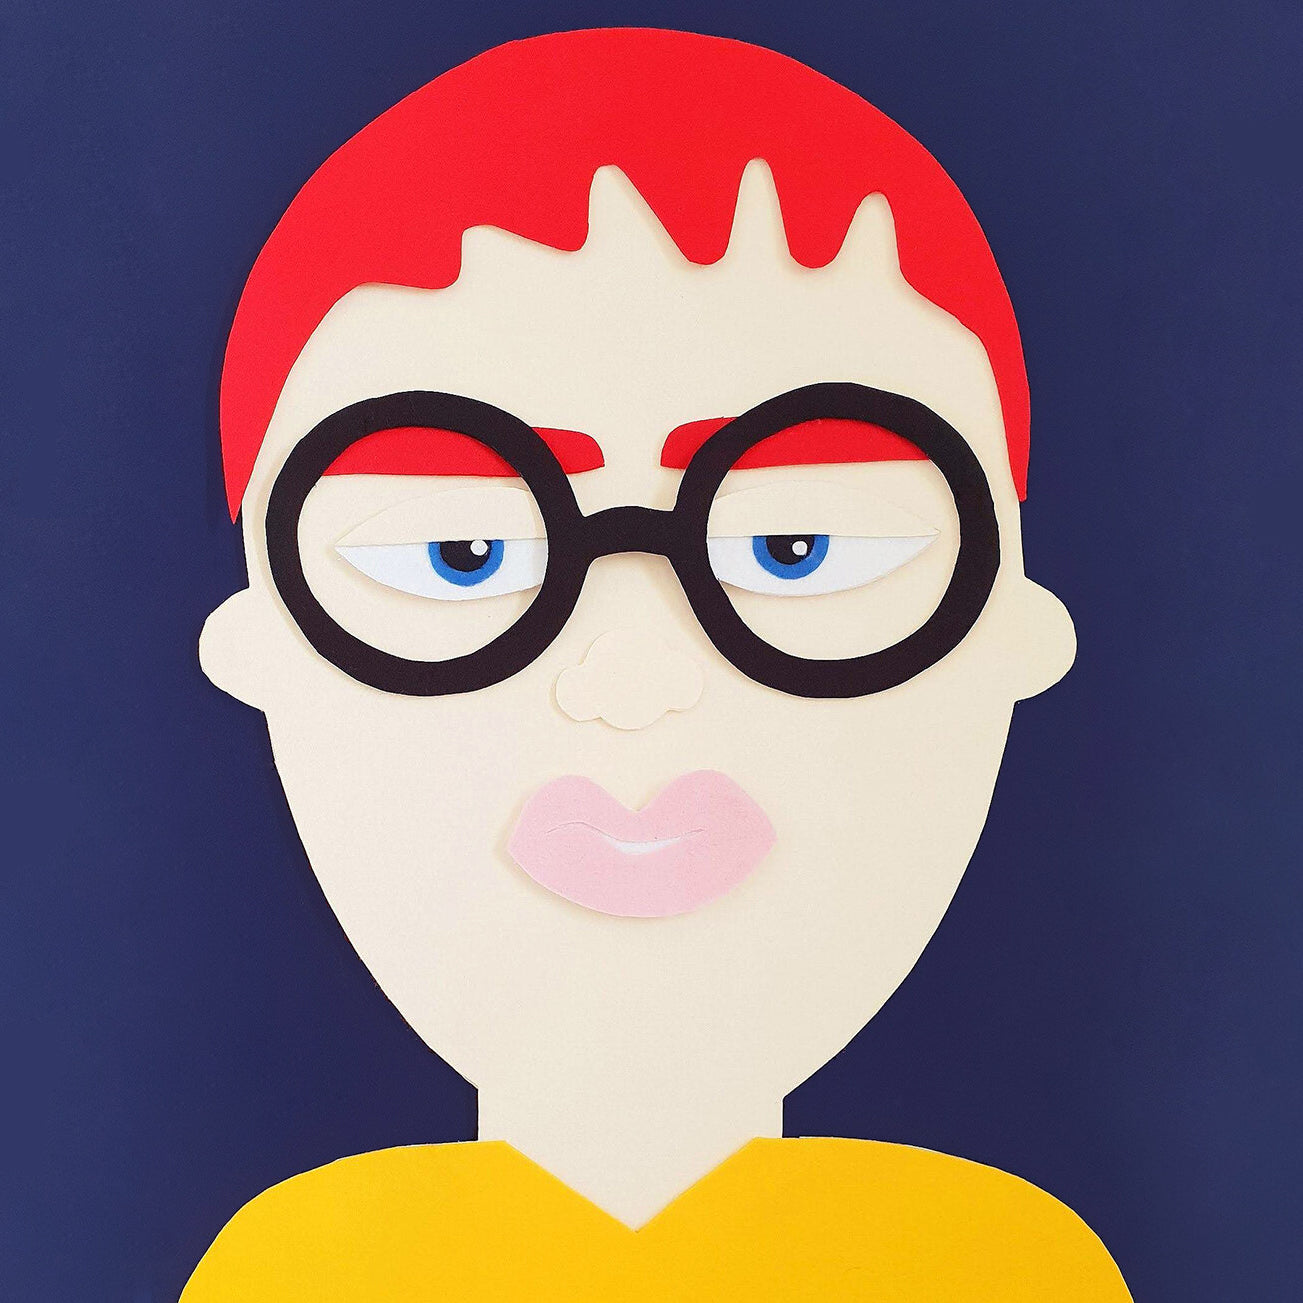 A felt collage installation of a white man with red hair and glasses, on a navy blue background.